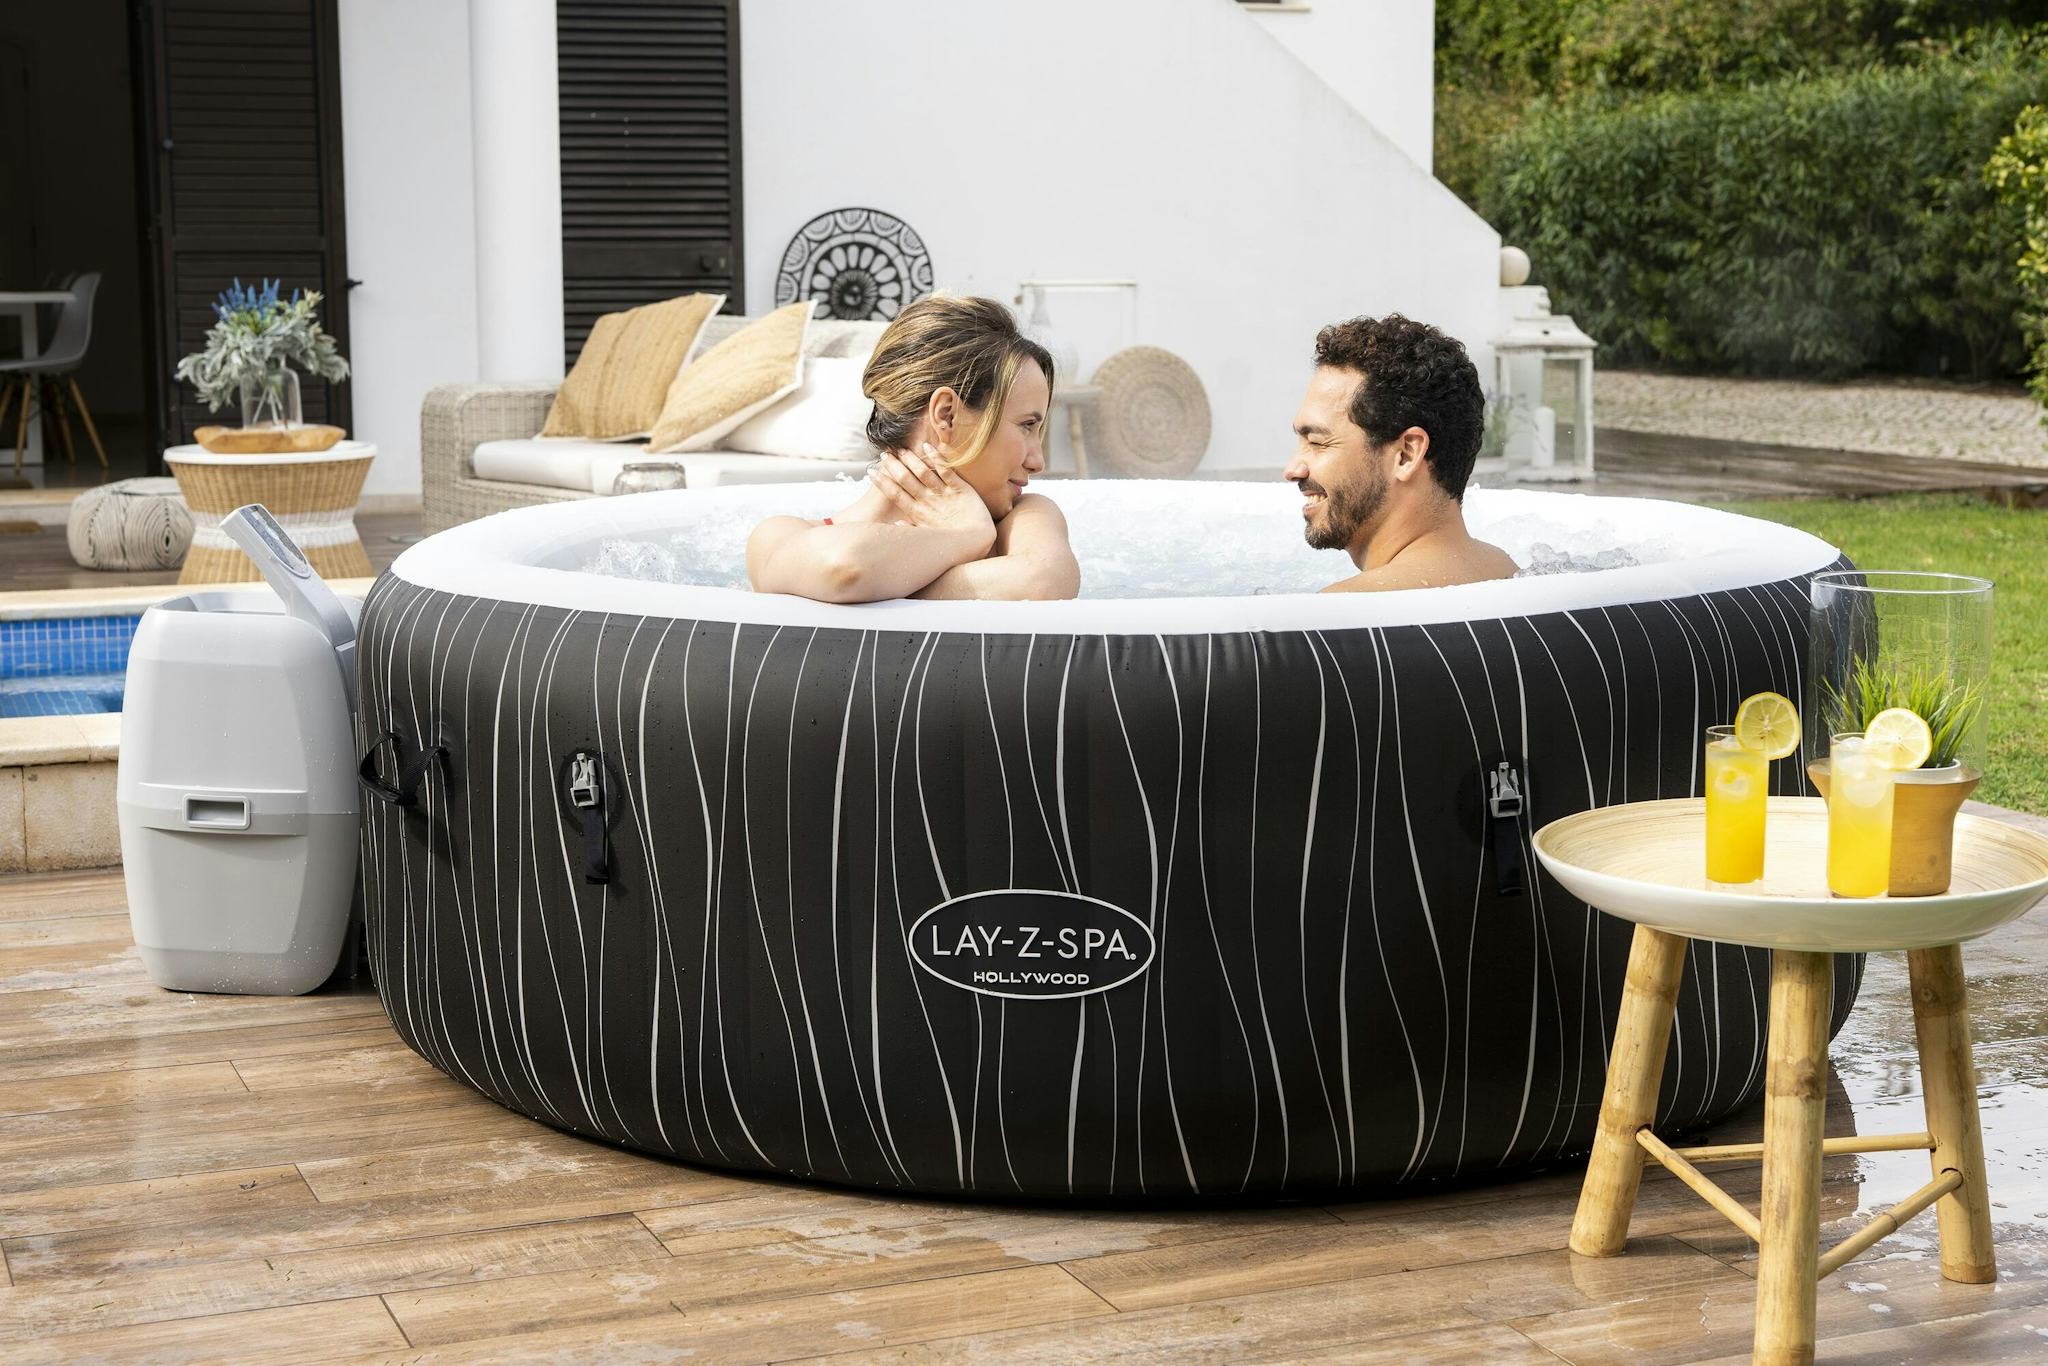 Spas Gonflables Spa gonflable rond Lay-Z-Spa Hollywood Airjet™ 4 - 6 personnes Bestway 45